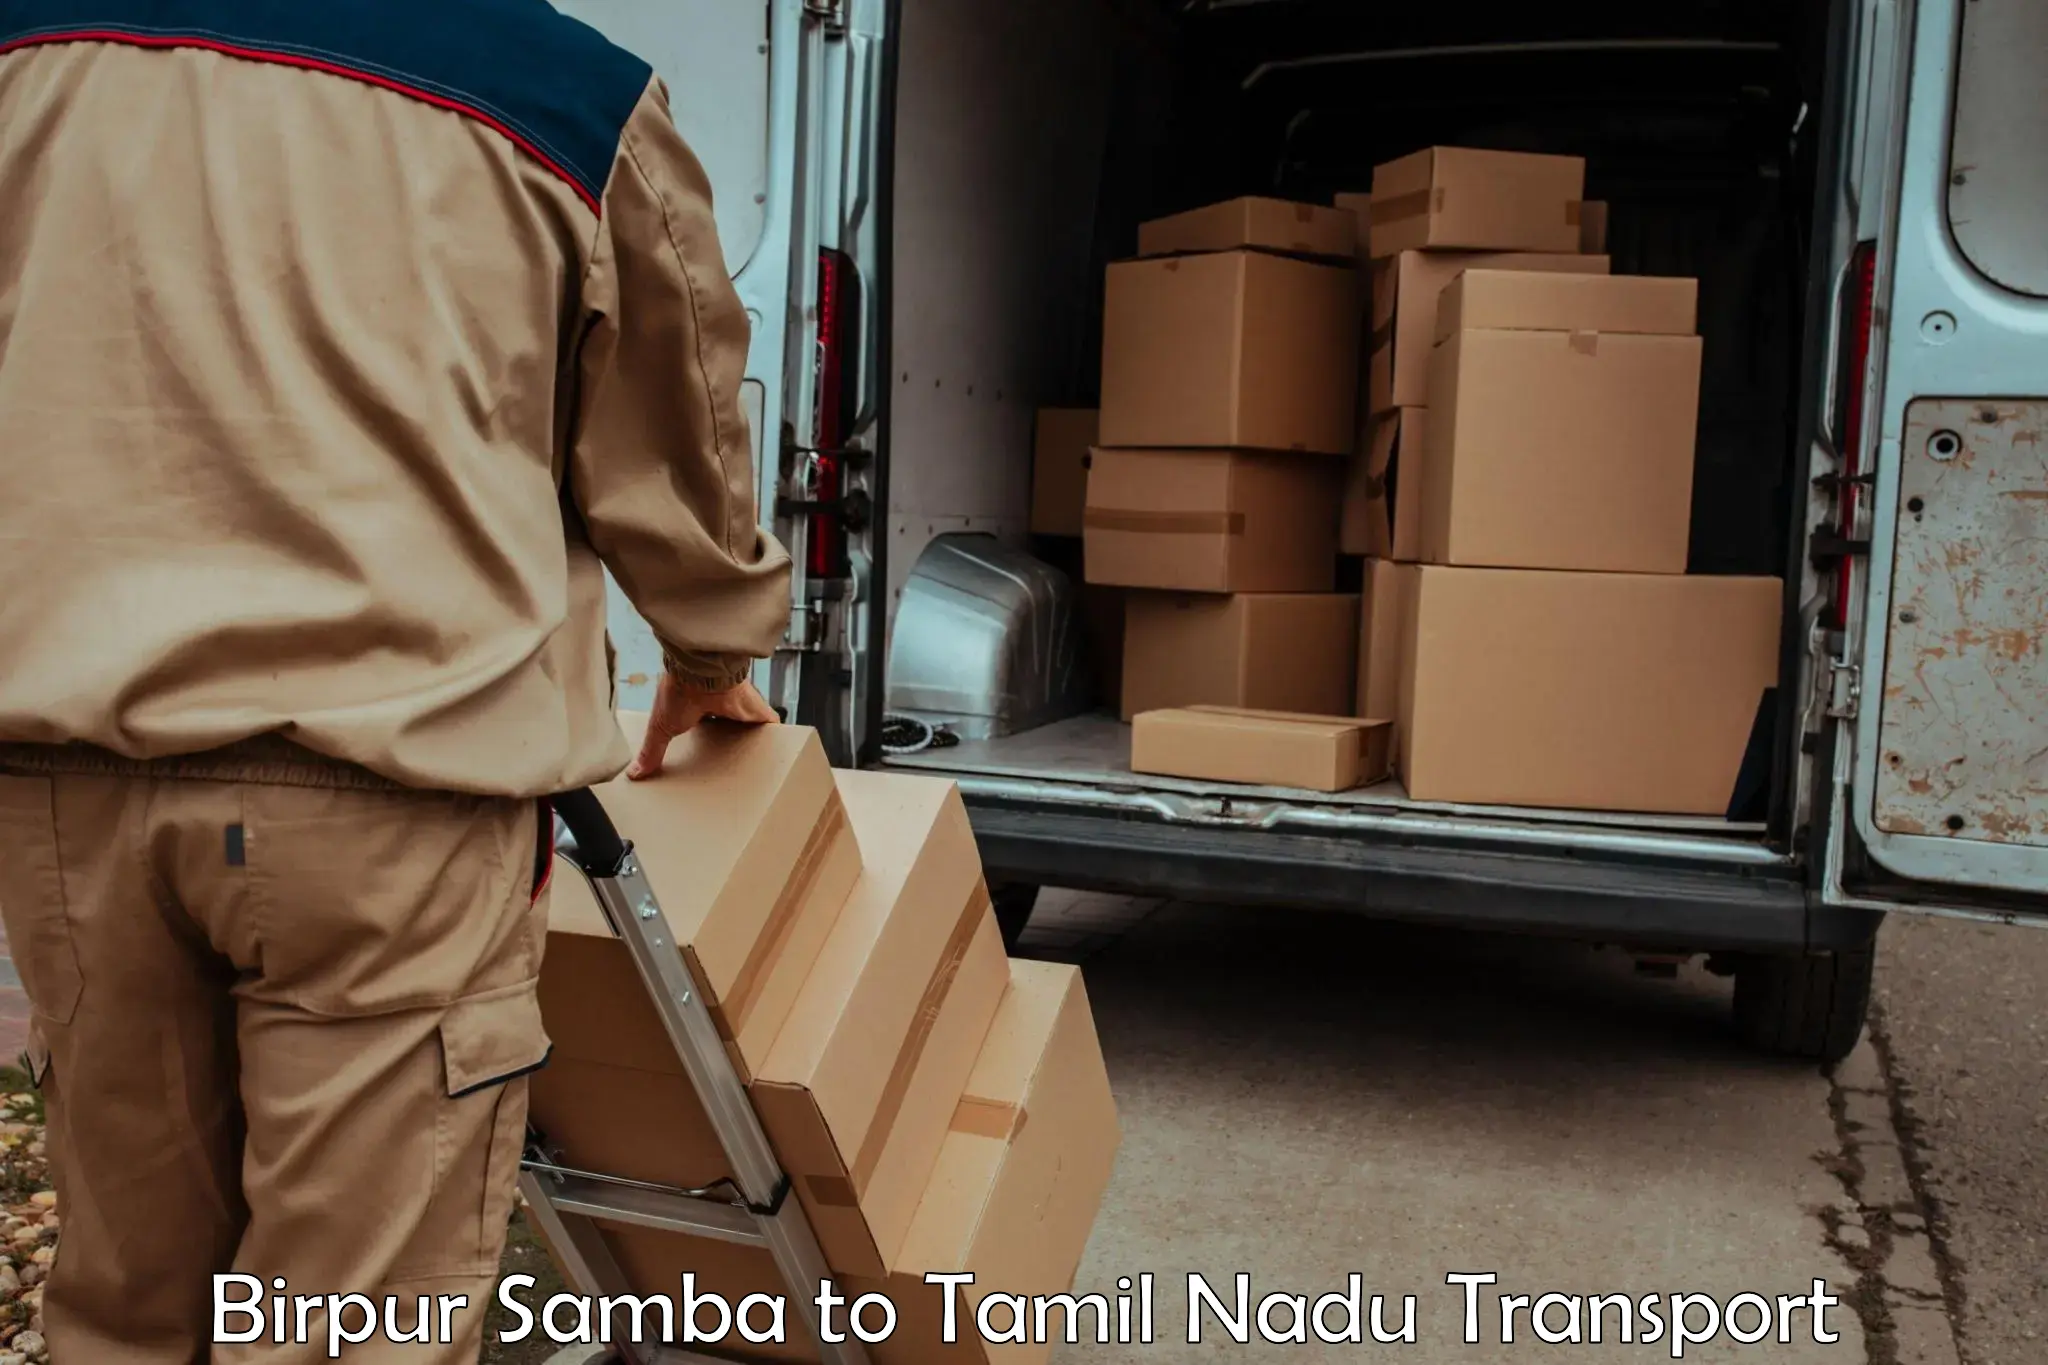 Domestic transport services Birpur Samba to Saveetha Institute of Medical and Technical Sciences Chennai